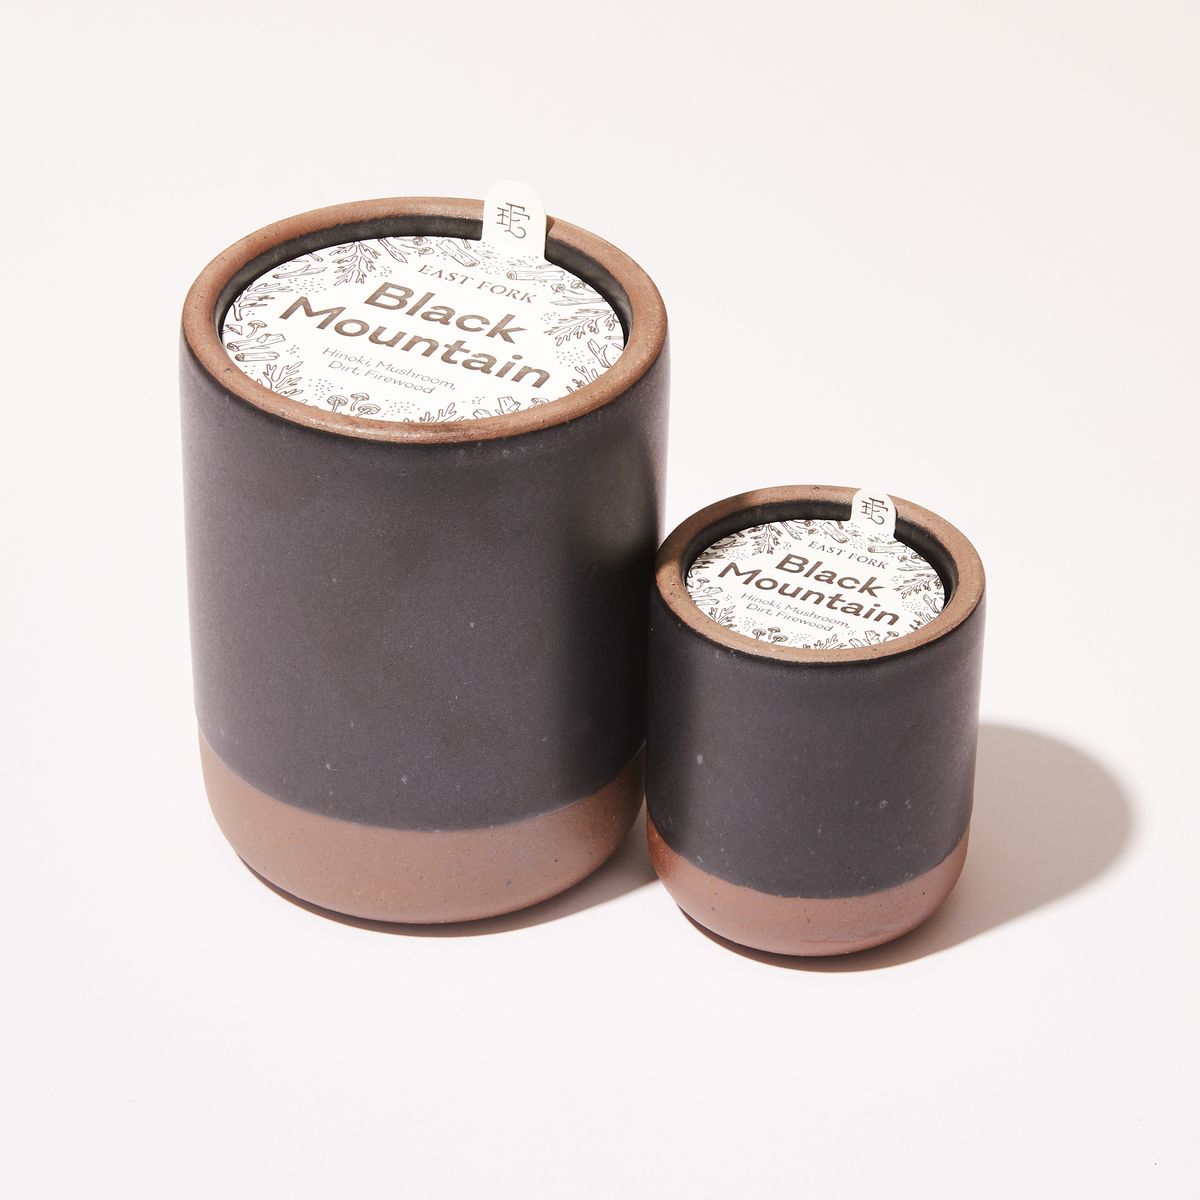 Small and large ceramic vessel next to each other in dark charcoal color with candles inside each. On top of each is a packaging label sitting that reads "Black Mountain"